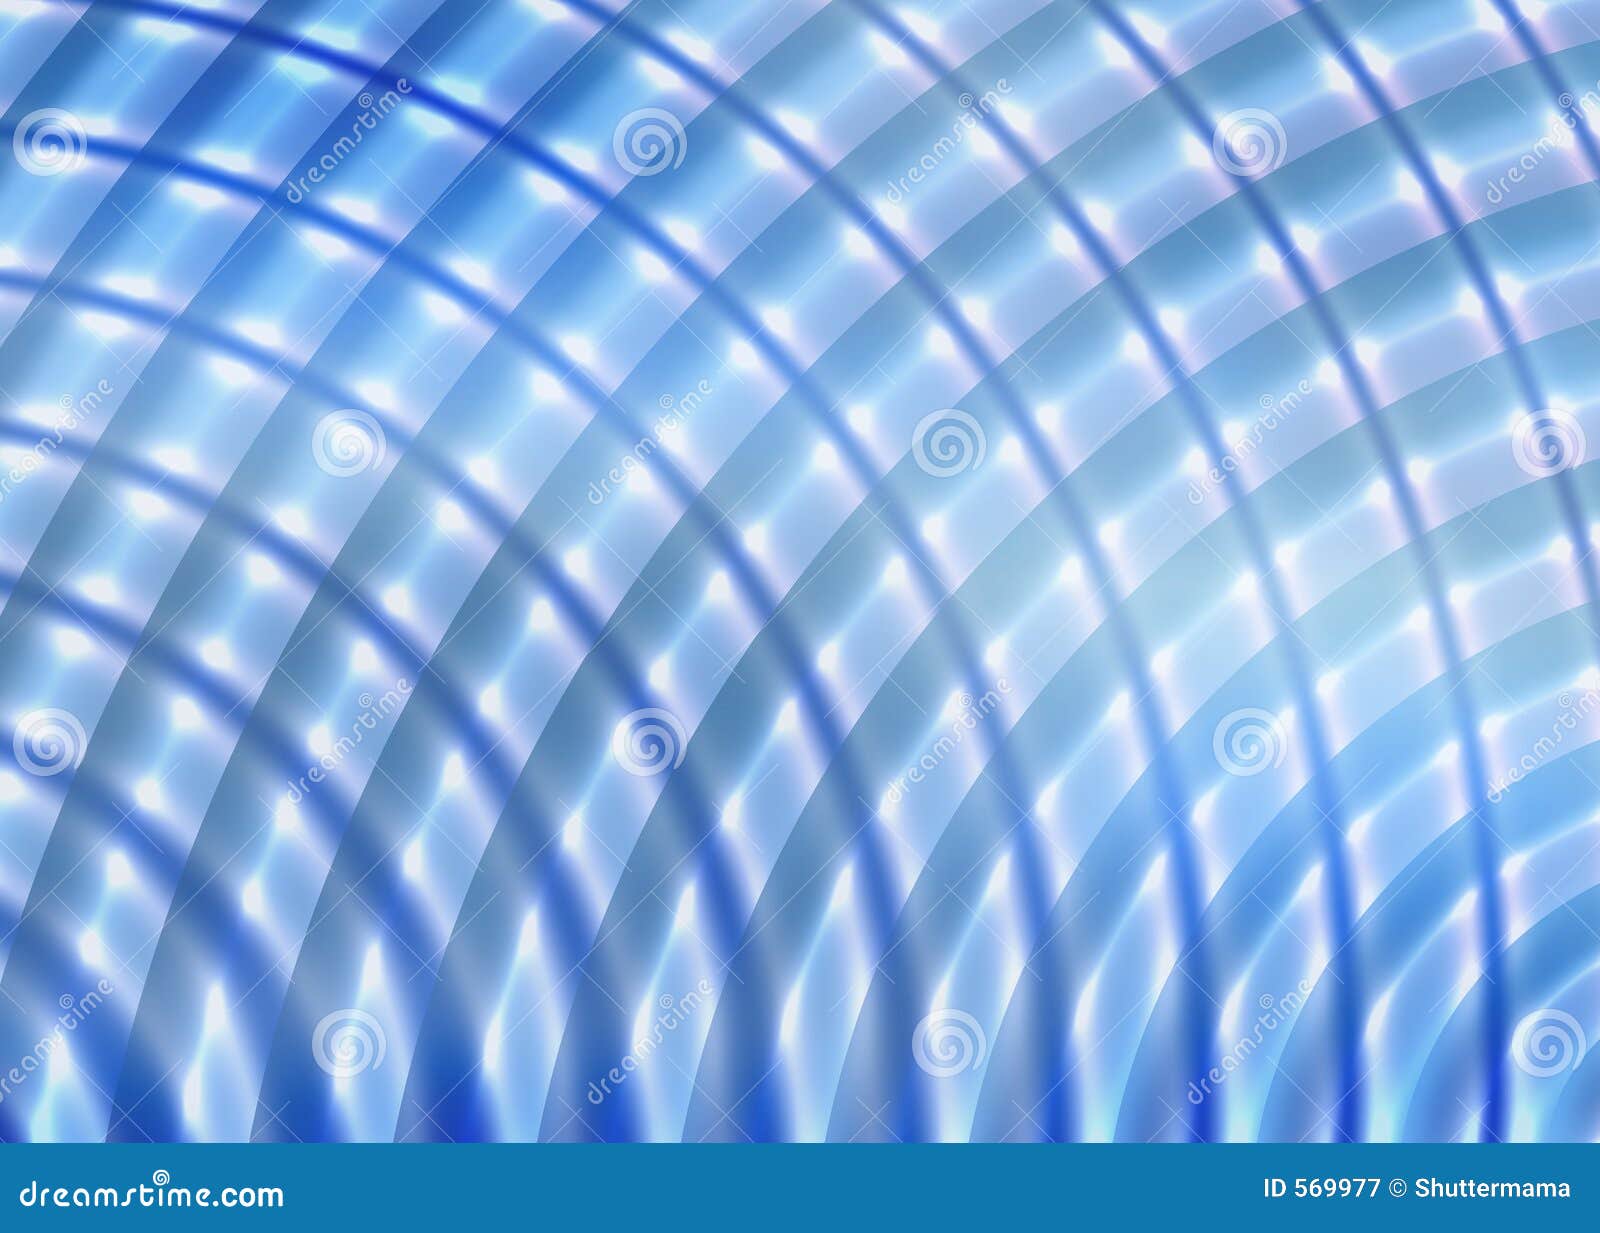 Fun Funky Blue Radial Background or Backdrop Stock Illustration ...